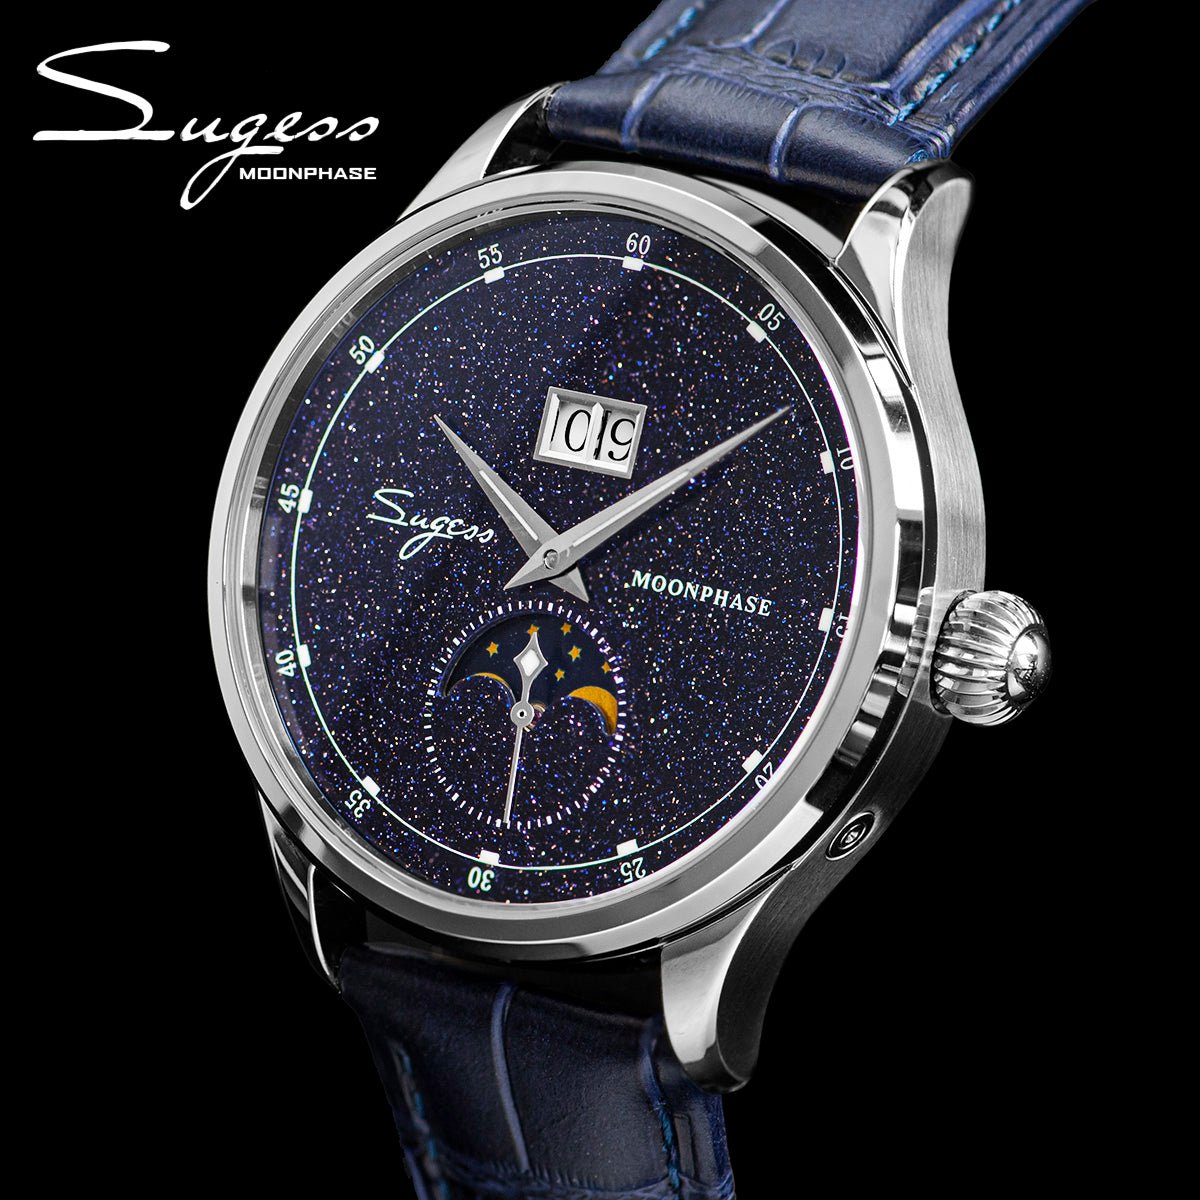 Sugess Mens Watch Limited Edition Moonphase 316L Stainless Steel Case Seagull ST2528 Movement Luxury Gemstone Stars Dial Gift - Maple City Timepieces